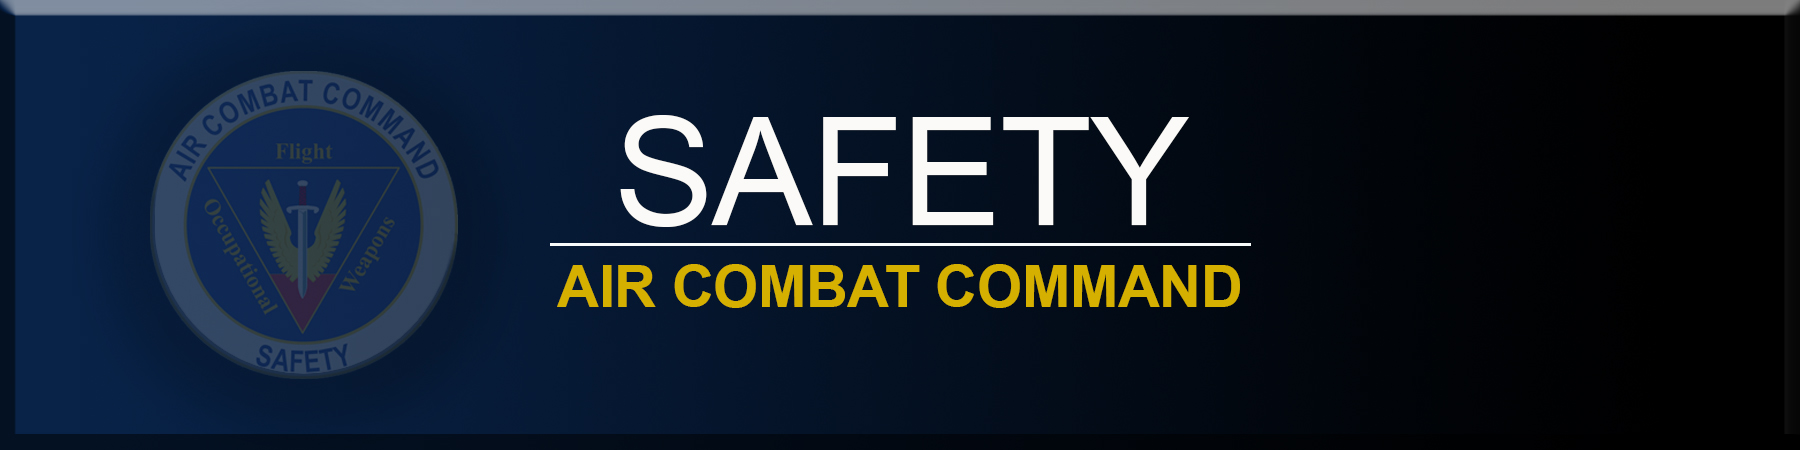 Link to Air Combat Command Safety